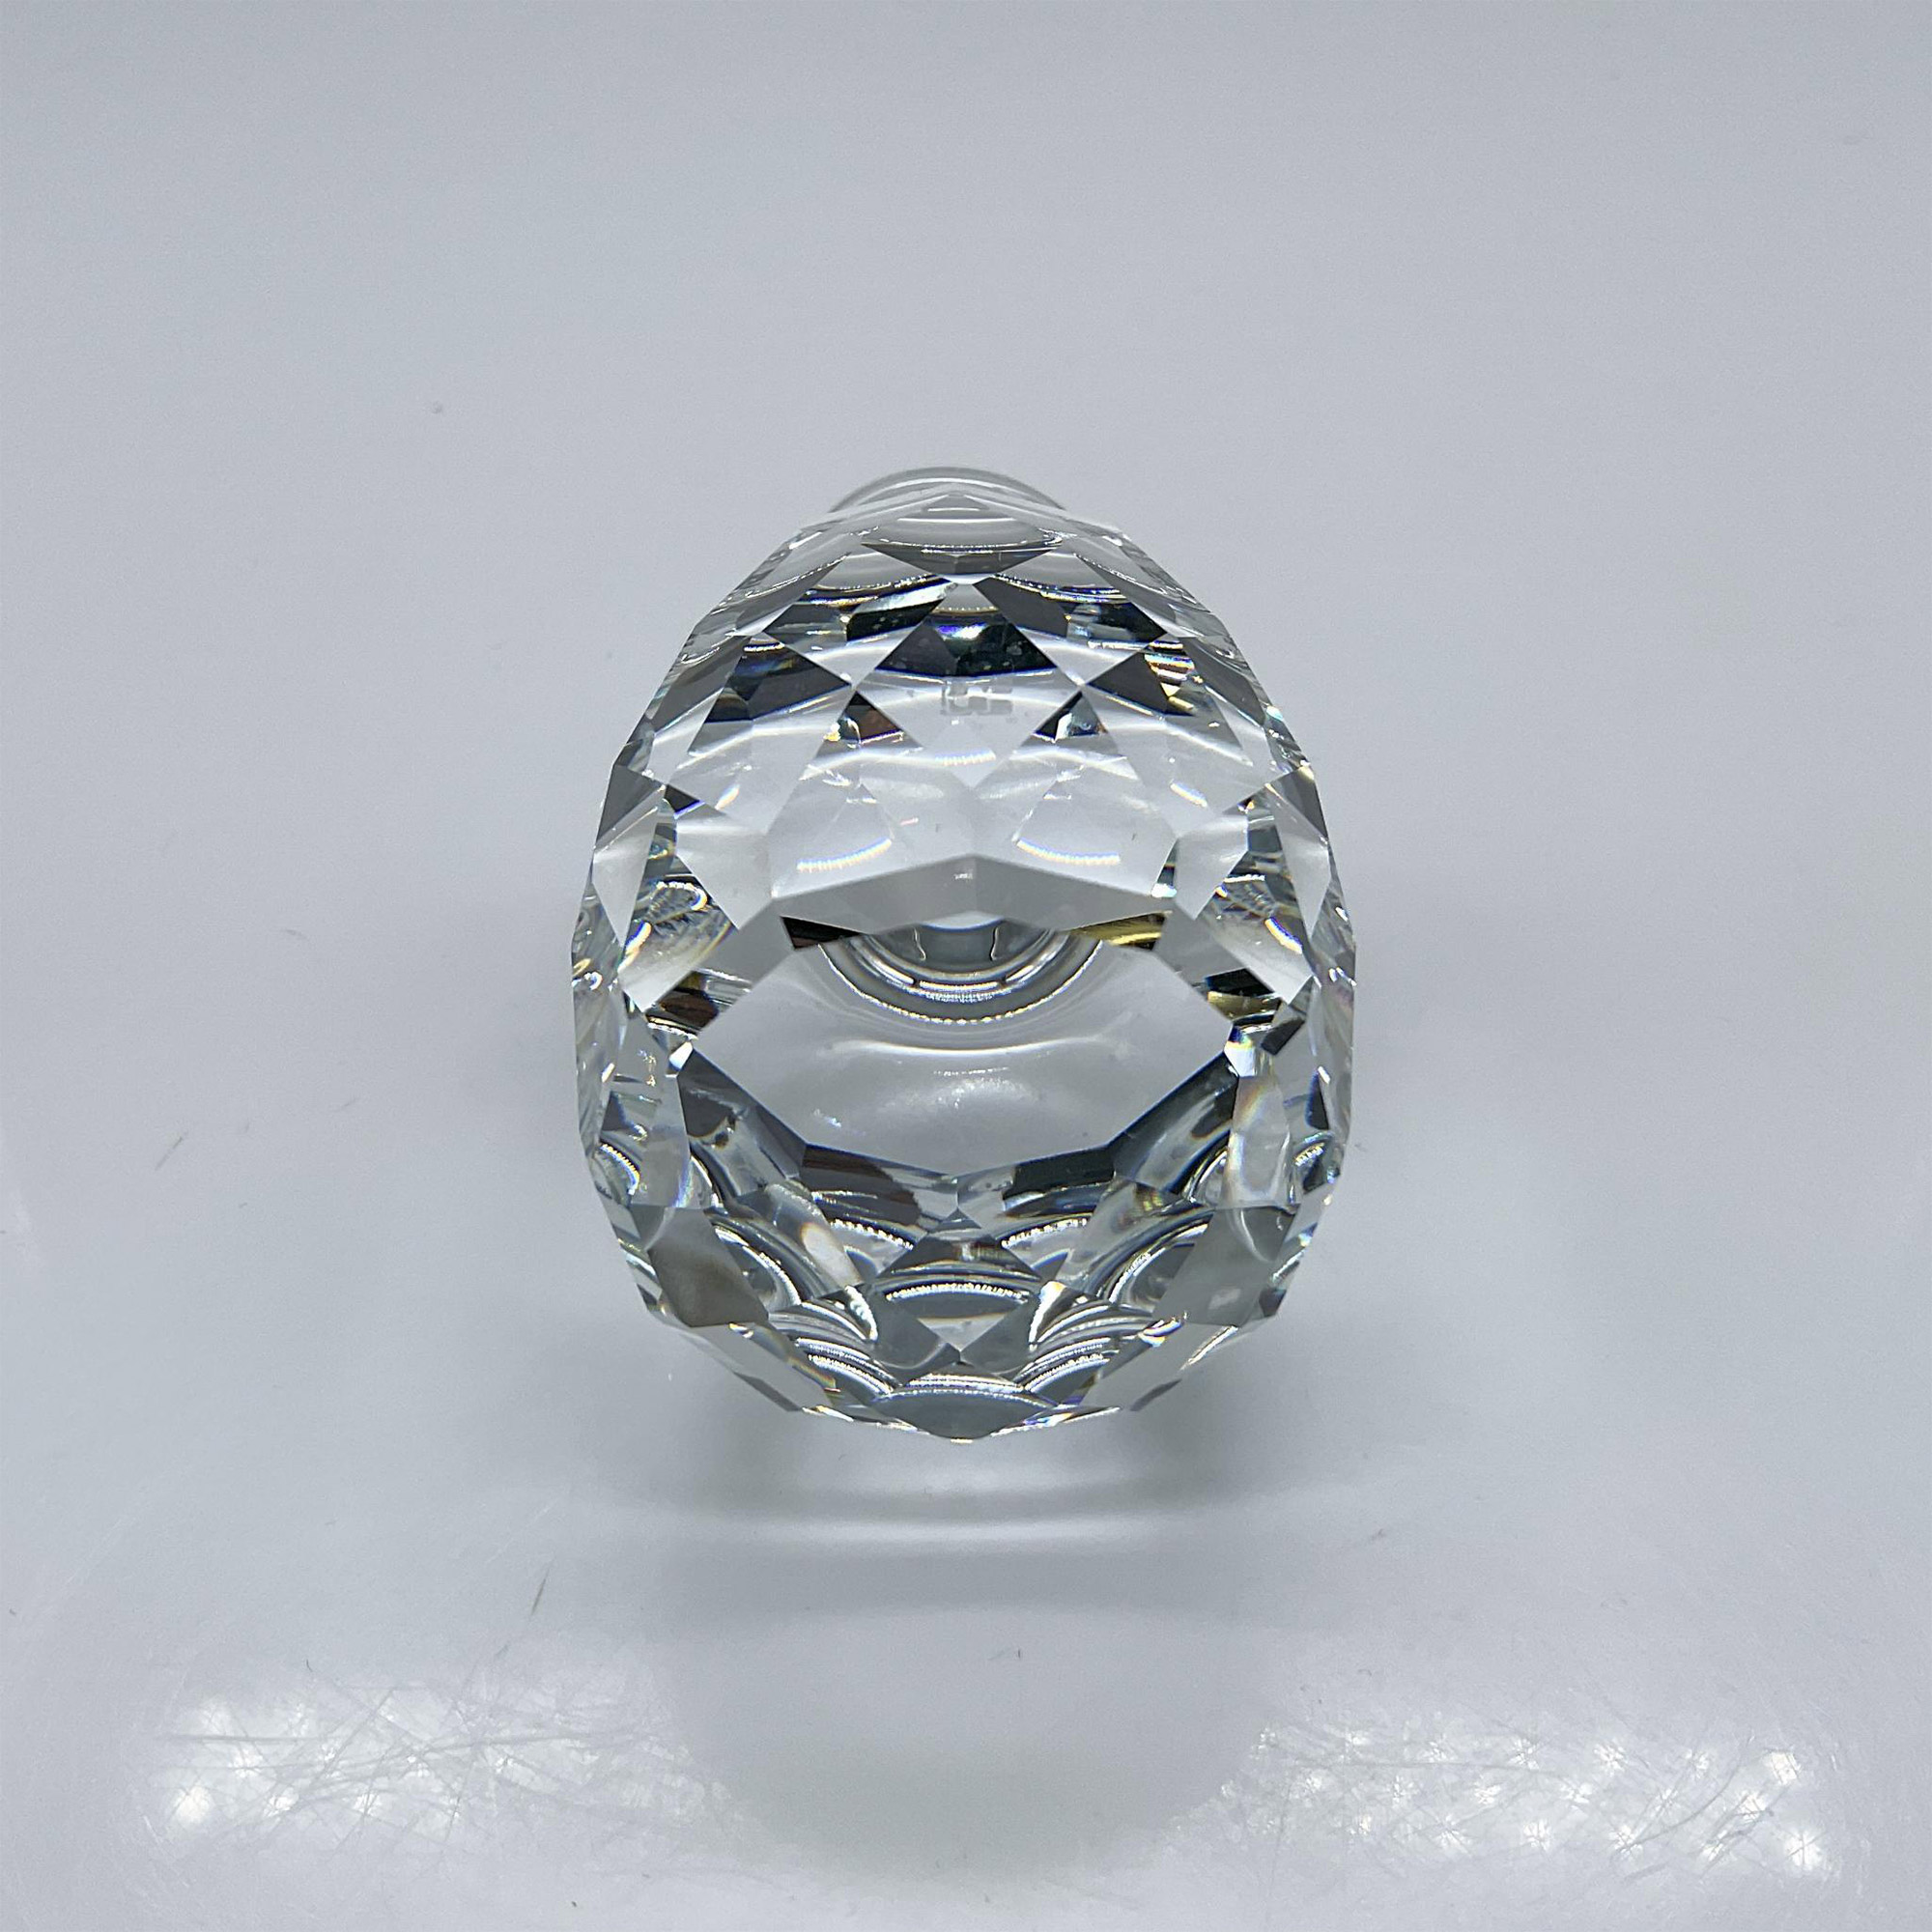 Swarovski Silver Crystal Paperweight, One Ton - Clear - Image 3 of 3